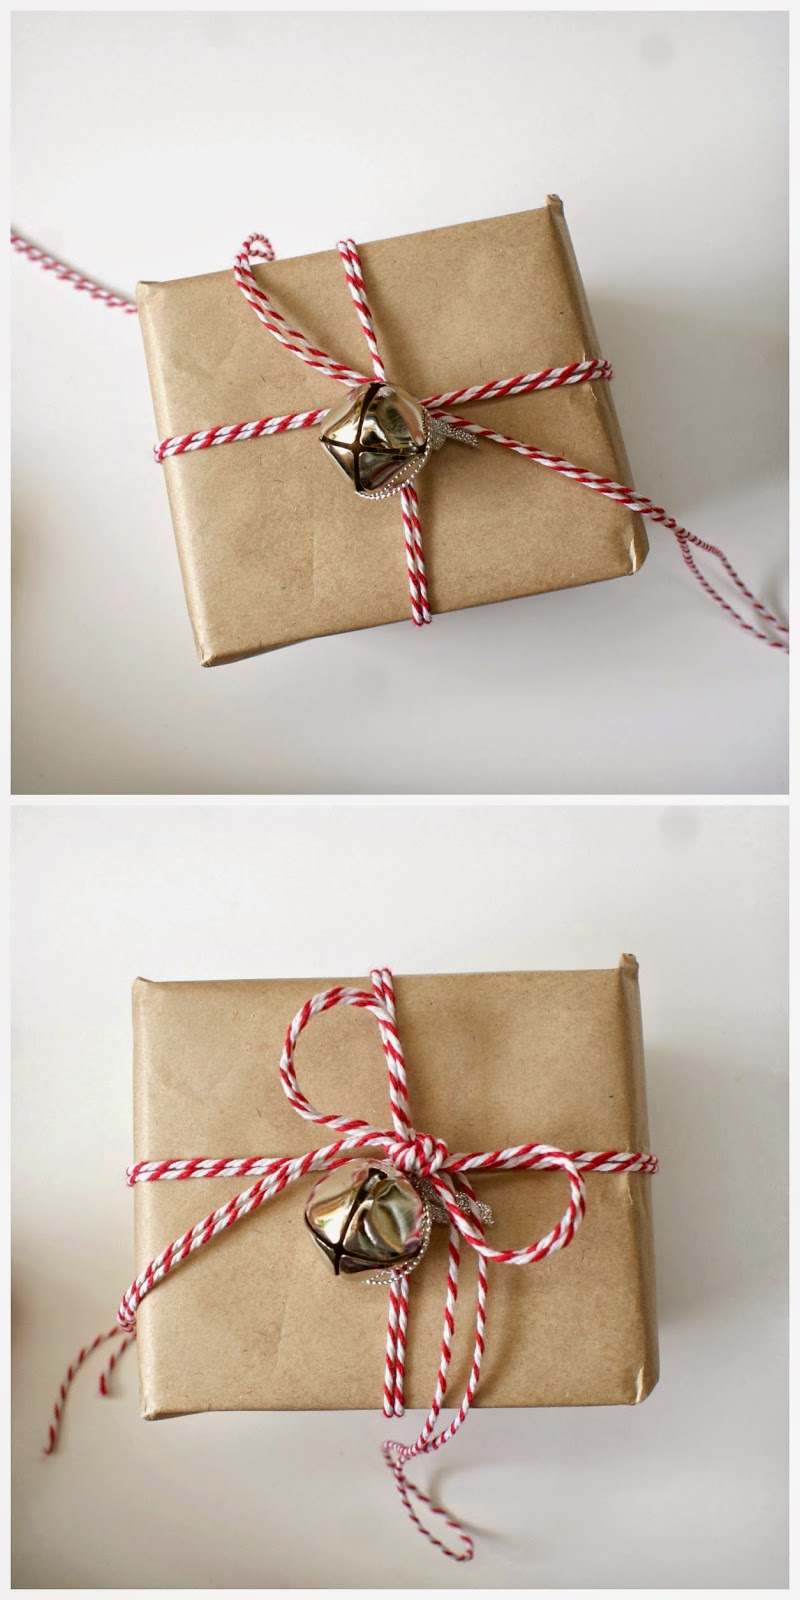 Beautiful Gift Wrapping Ideas on a Budget - Adding Silver Bells and Bakers Twine for a Festive Touch